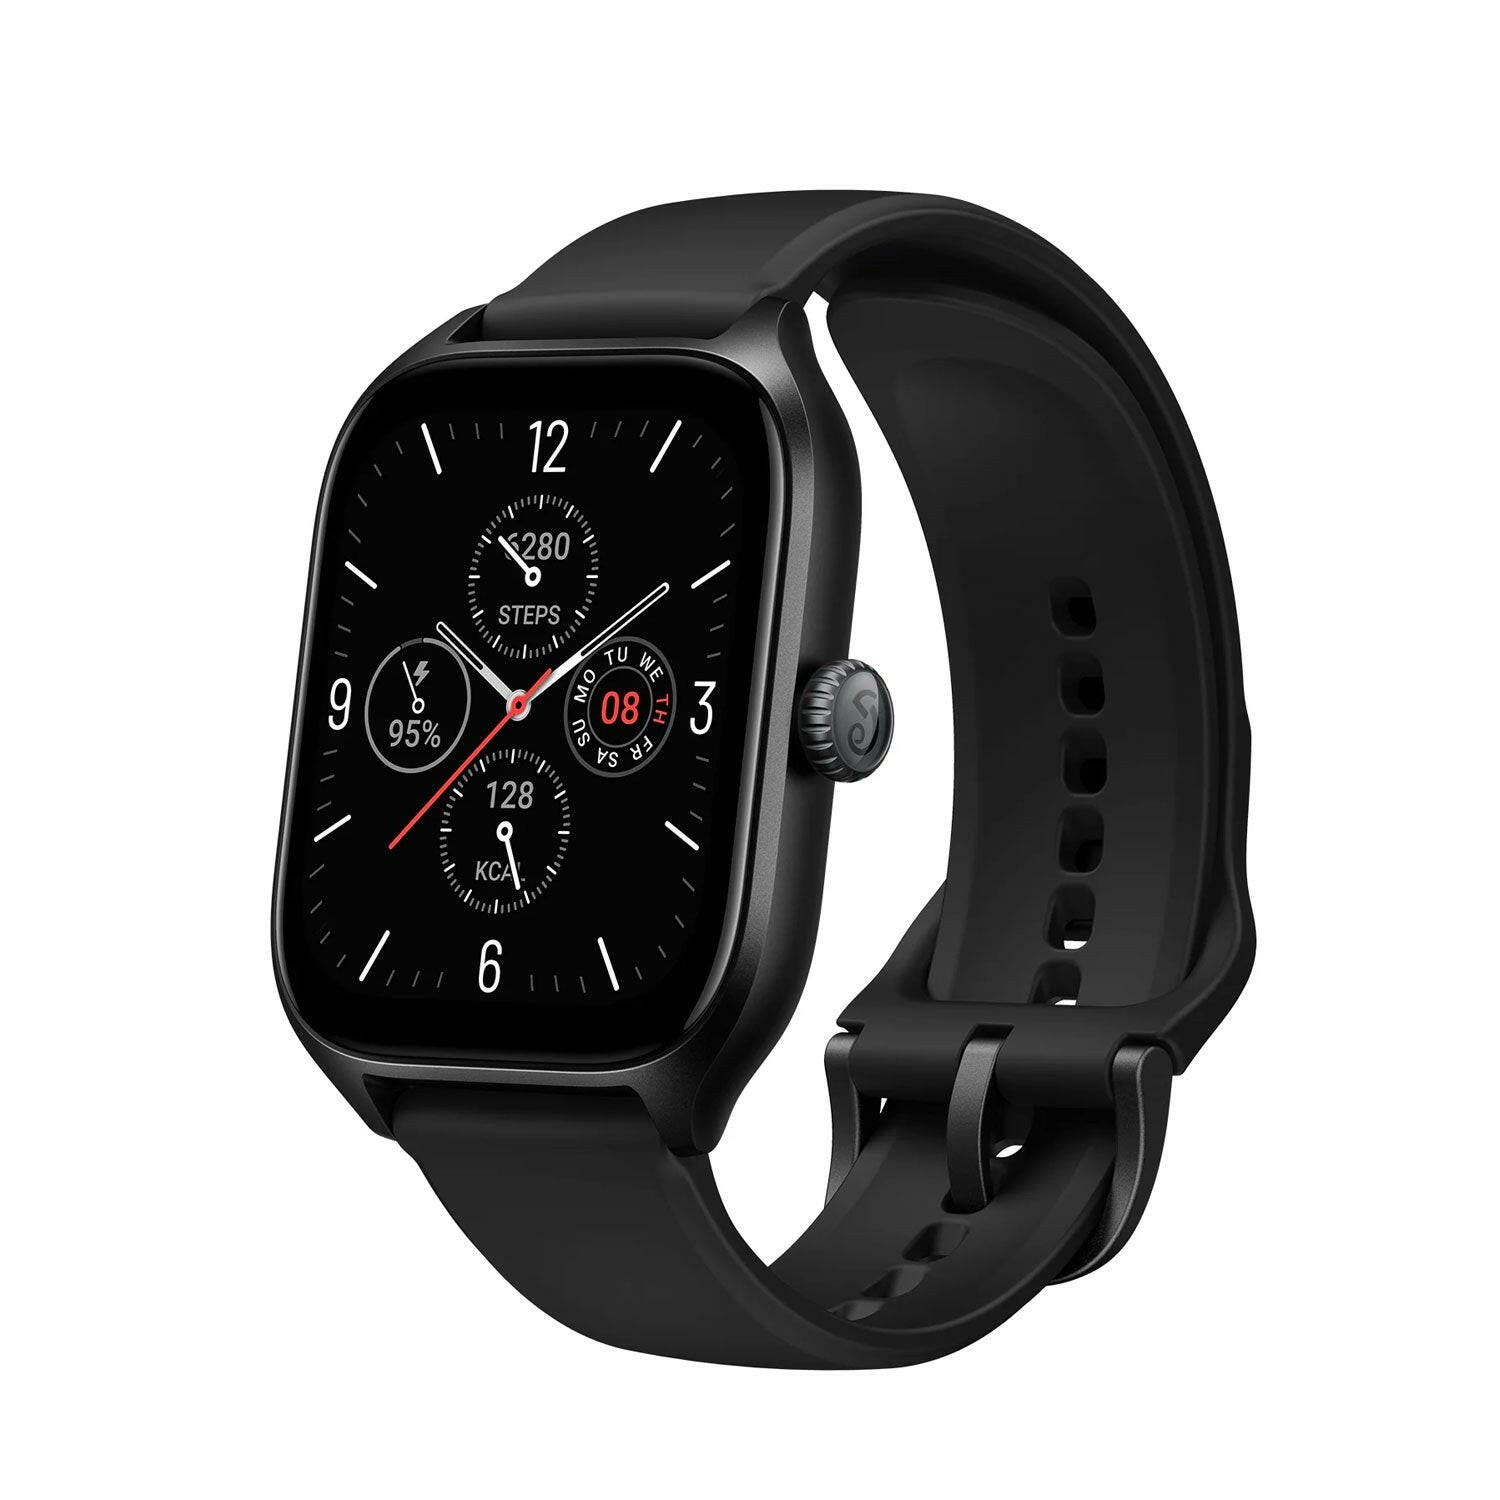 GTS　Smart　Store　Watch　15%　₹16,999.00　Amazfit　Store　Official　Credits.　Buy　Amazfit